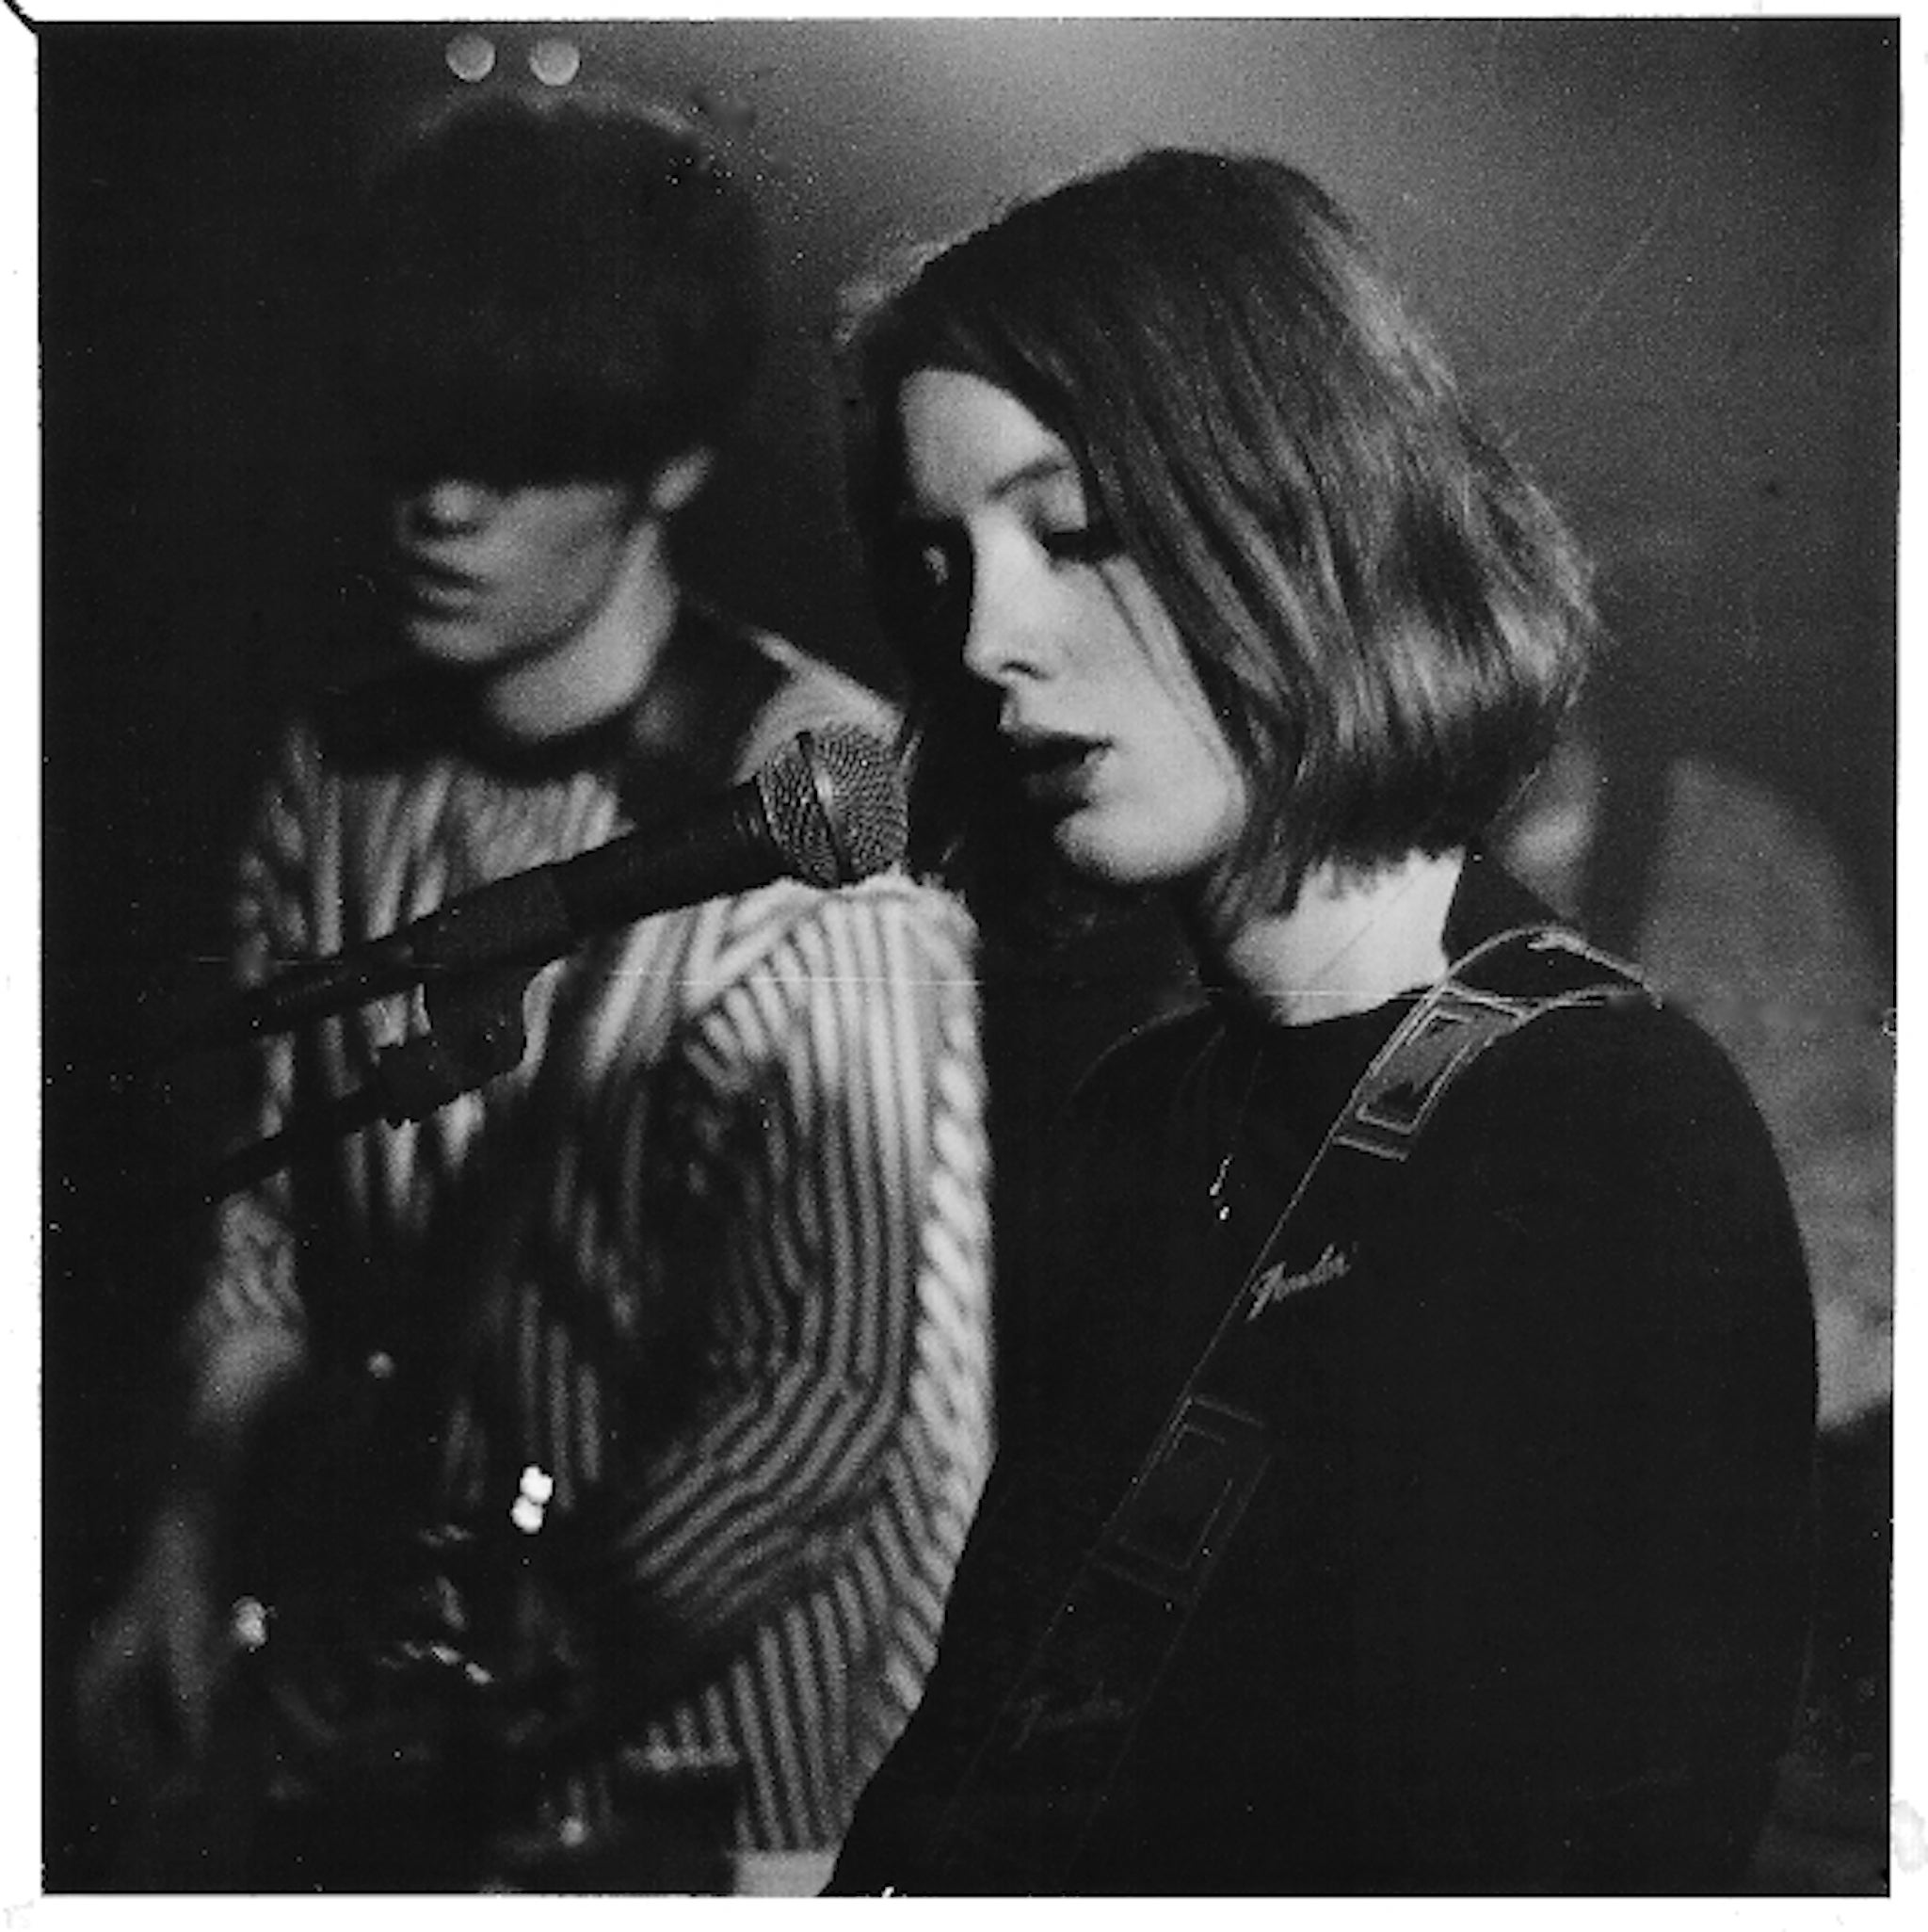 Rachel Goswell of Slowdive perform at The Charlotte in Leicester in 1992